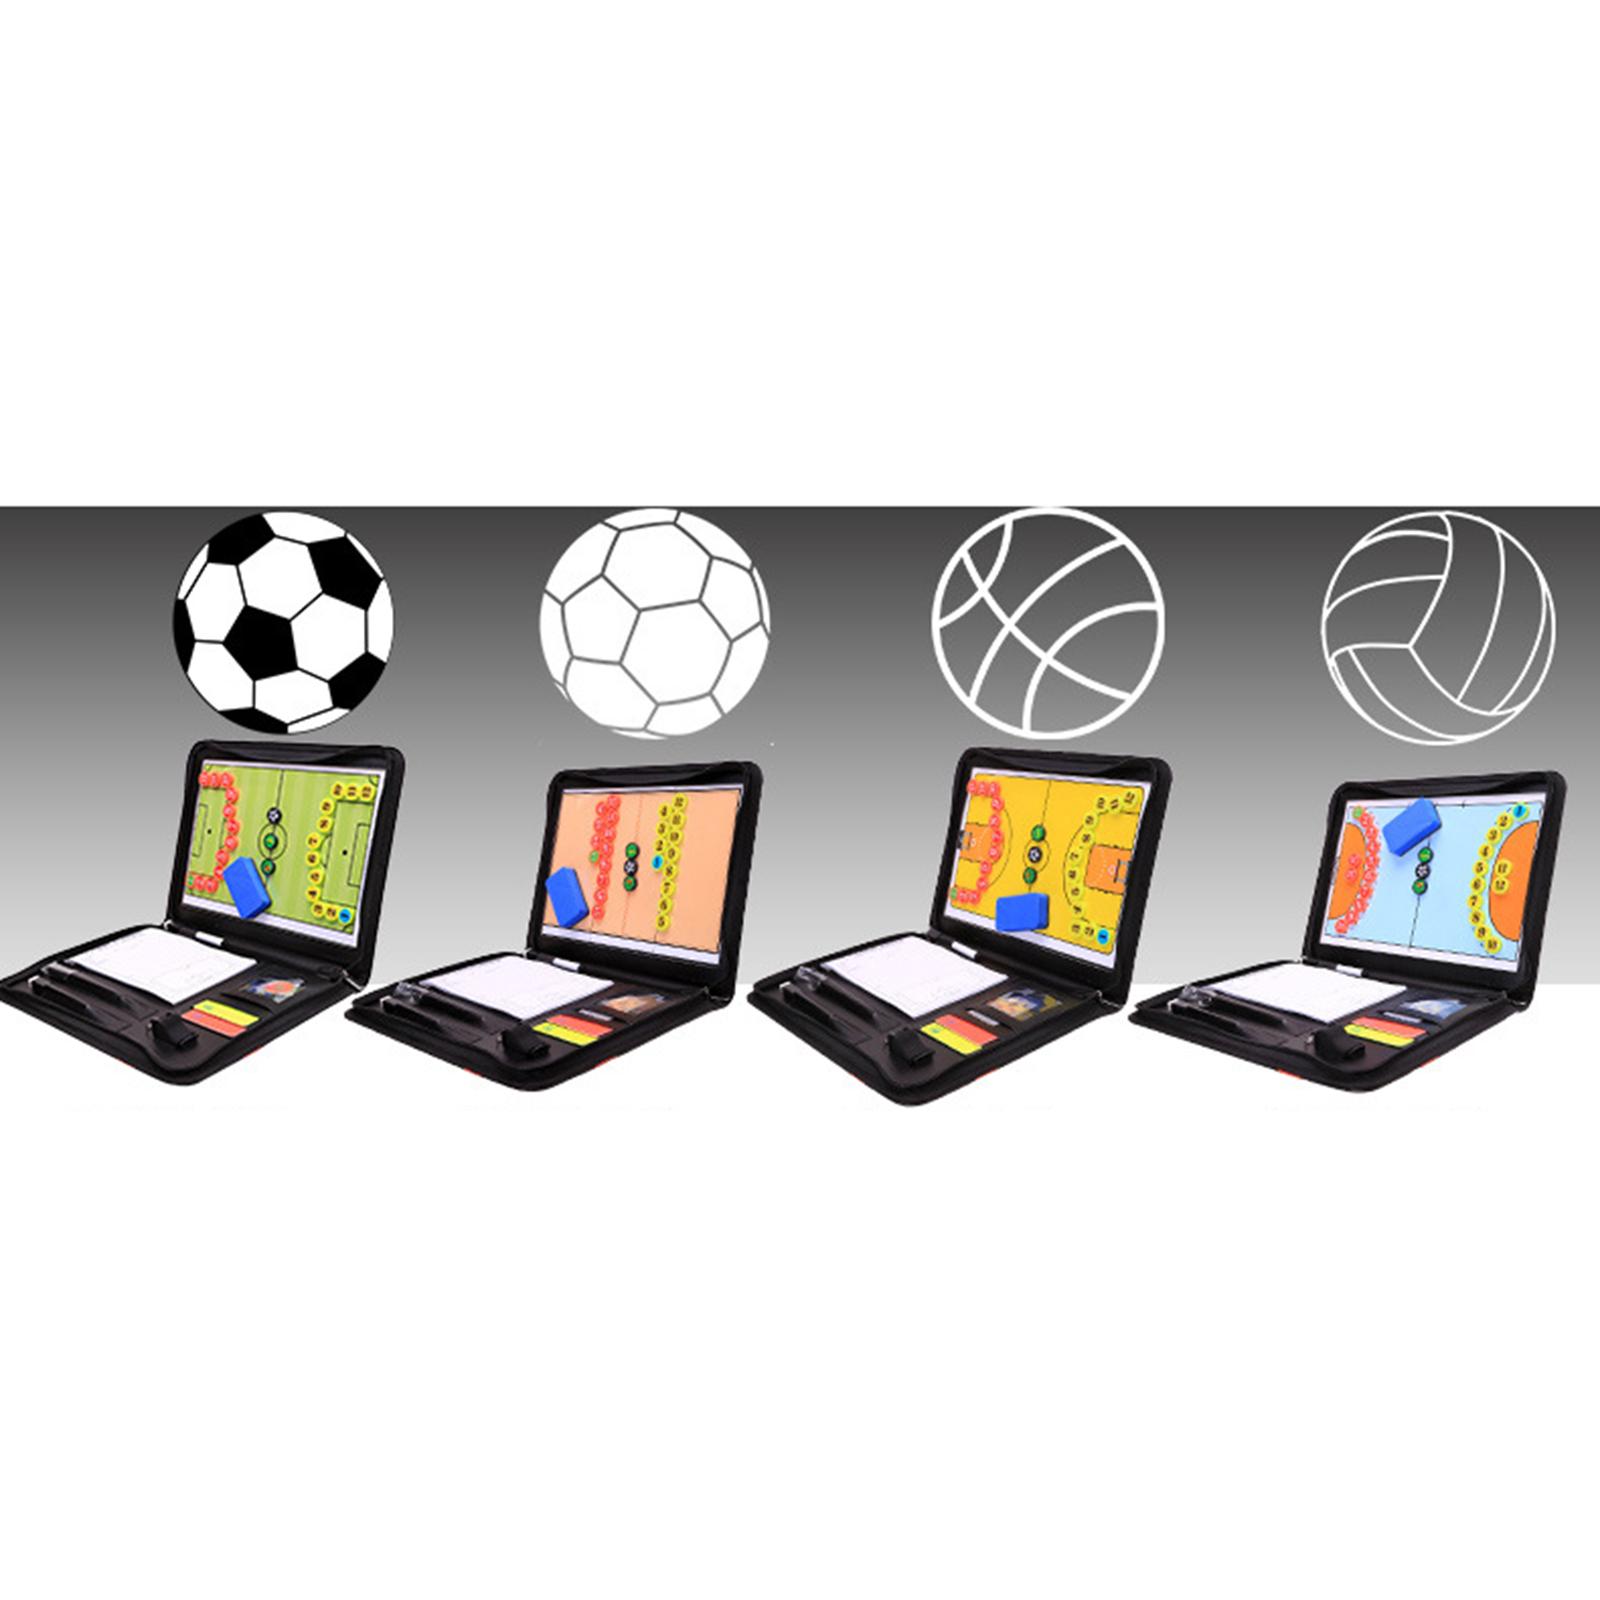 Professional Soccer coaching boards with 27 Buttons Teaching Assistant 4 in 1